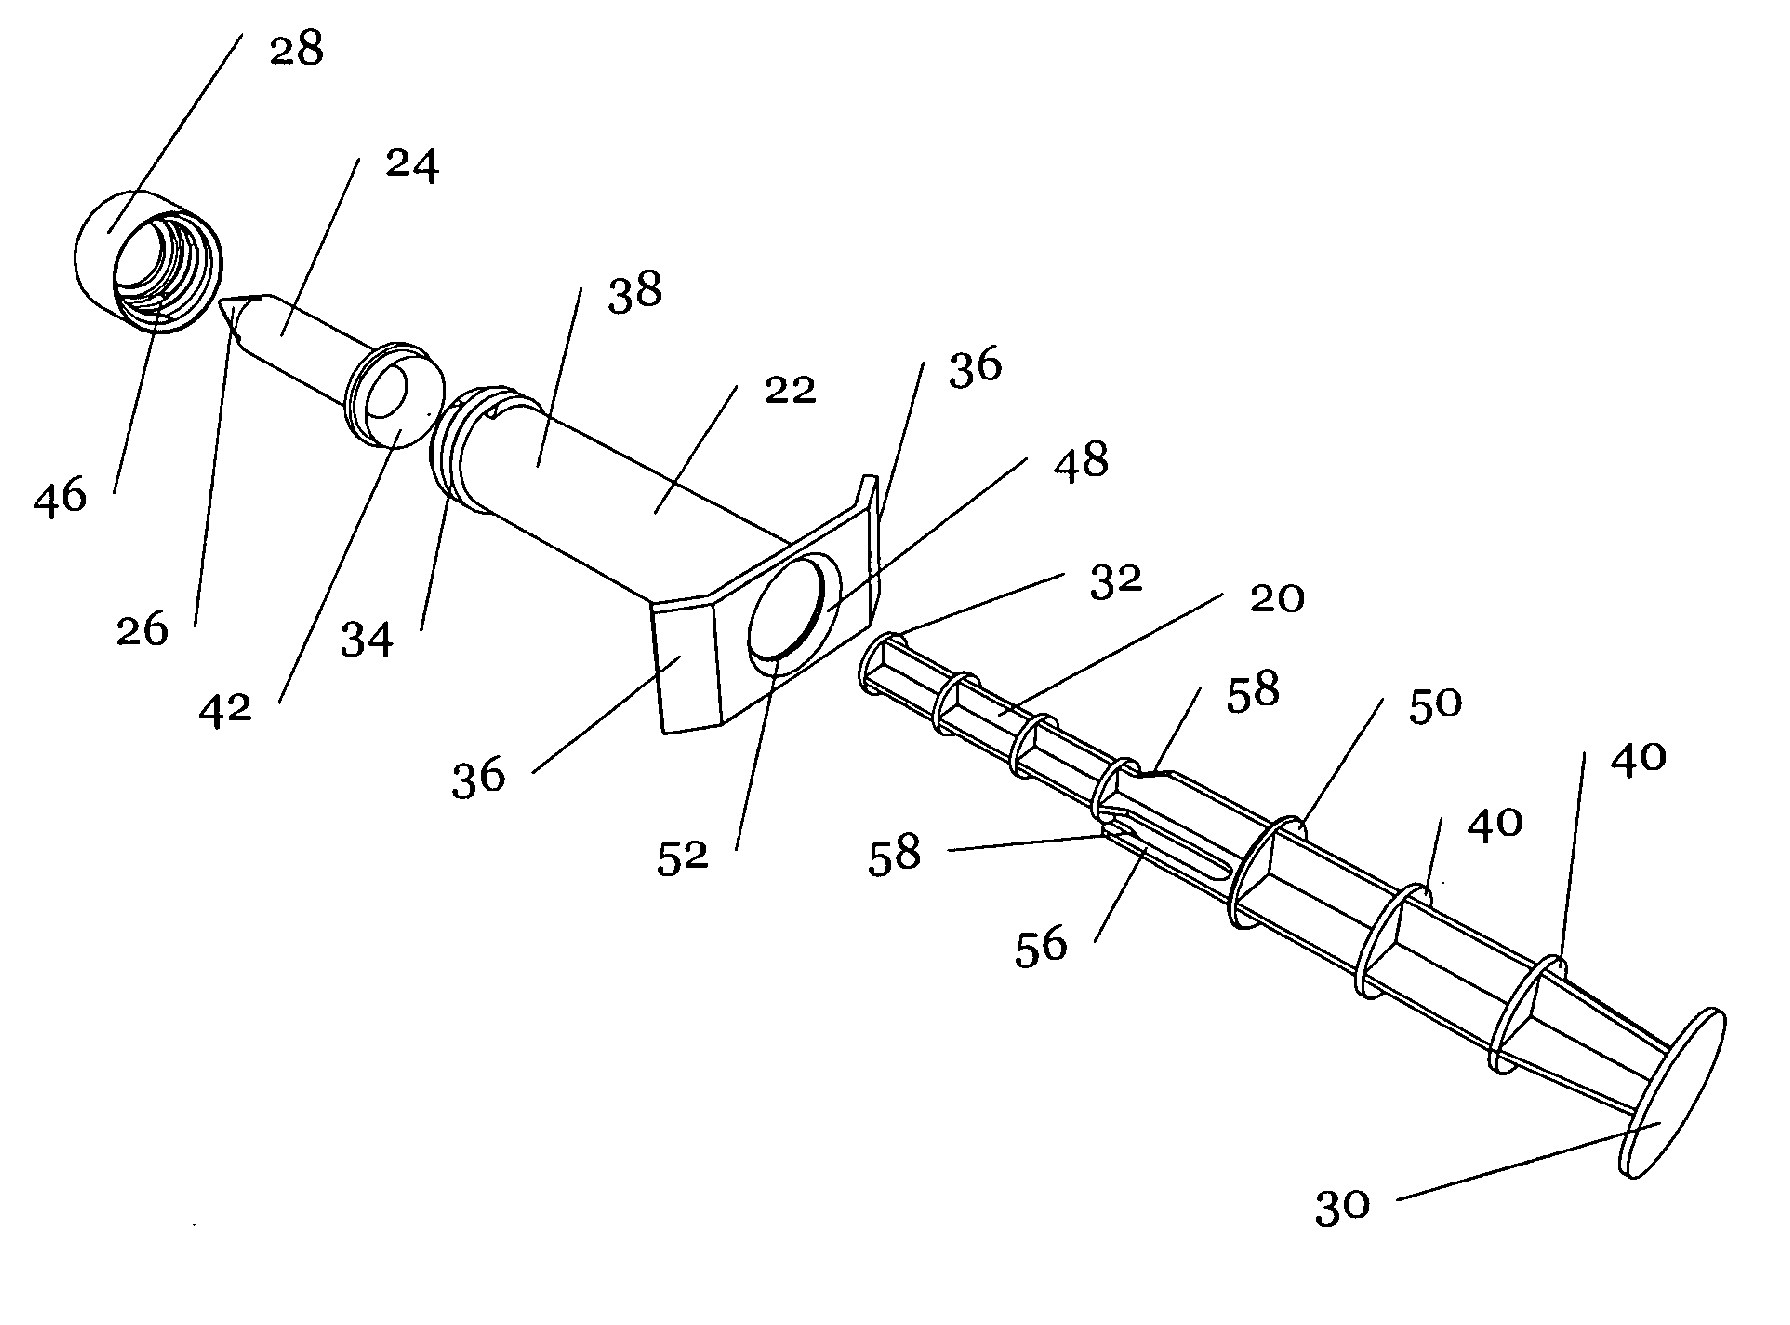 Device to Inject Foods with Solid Objects